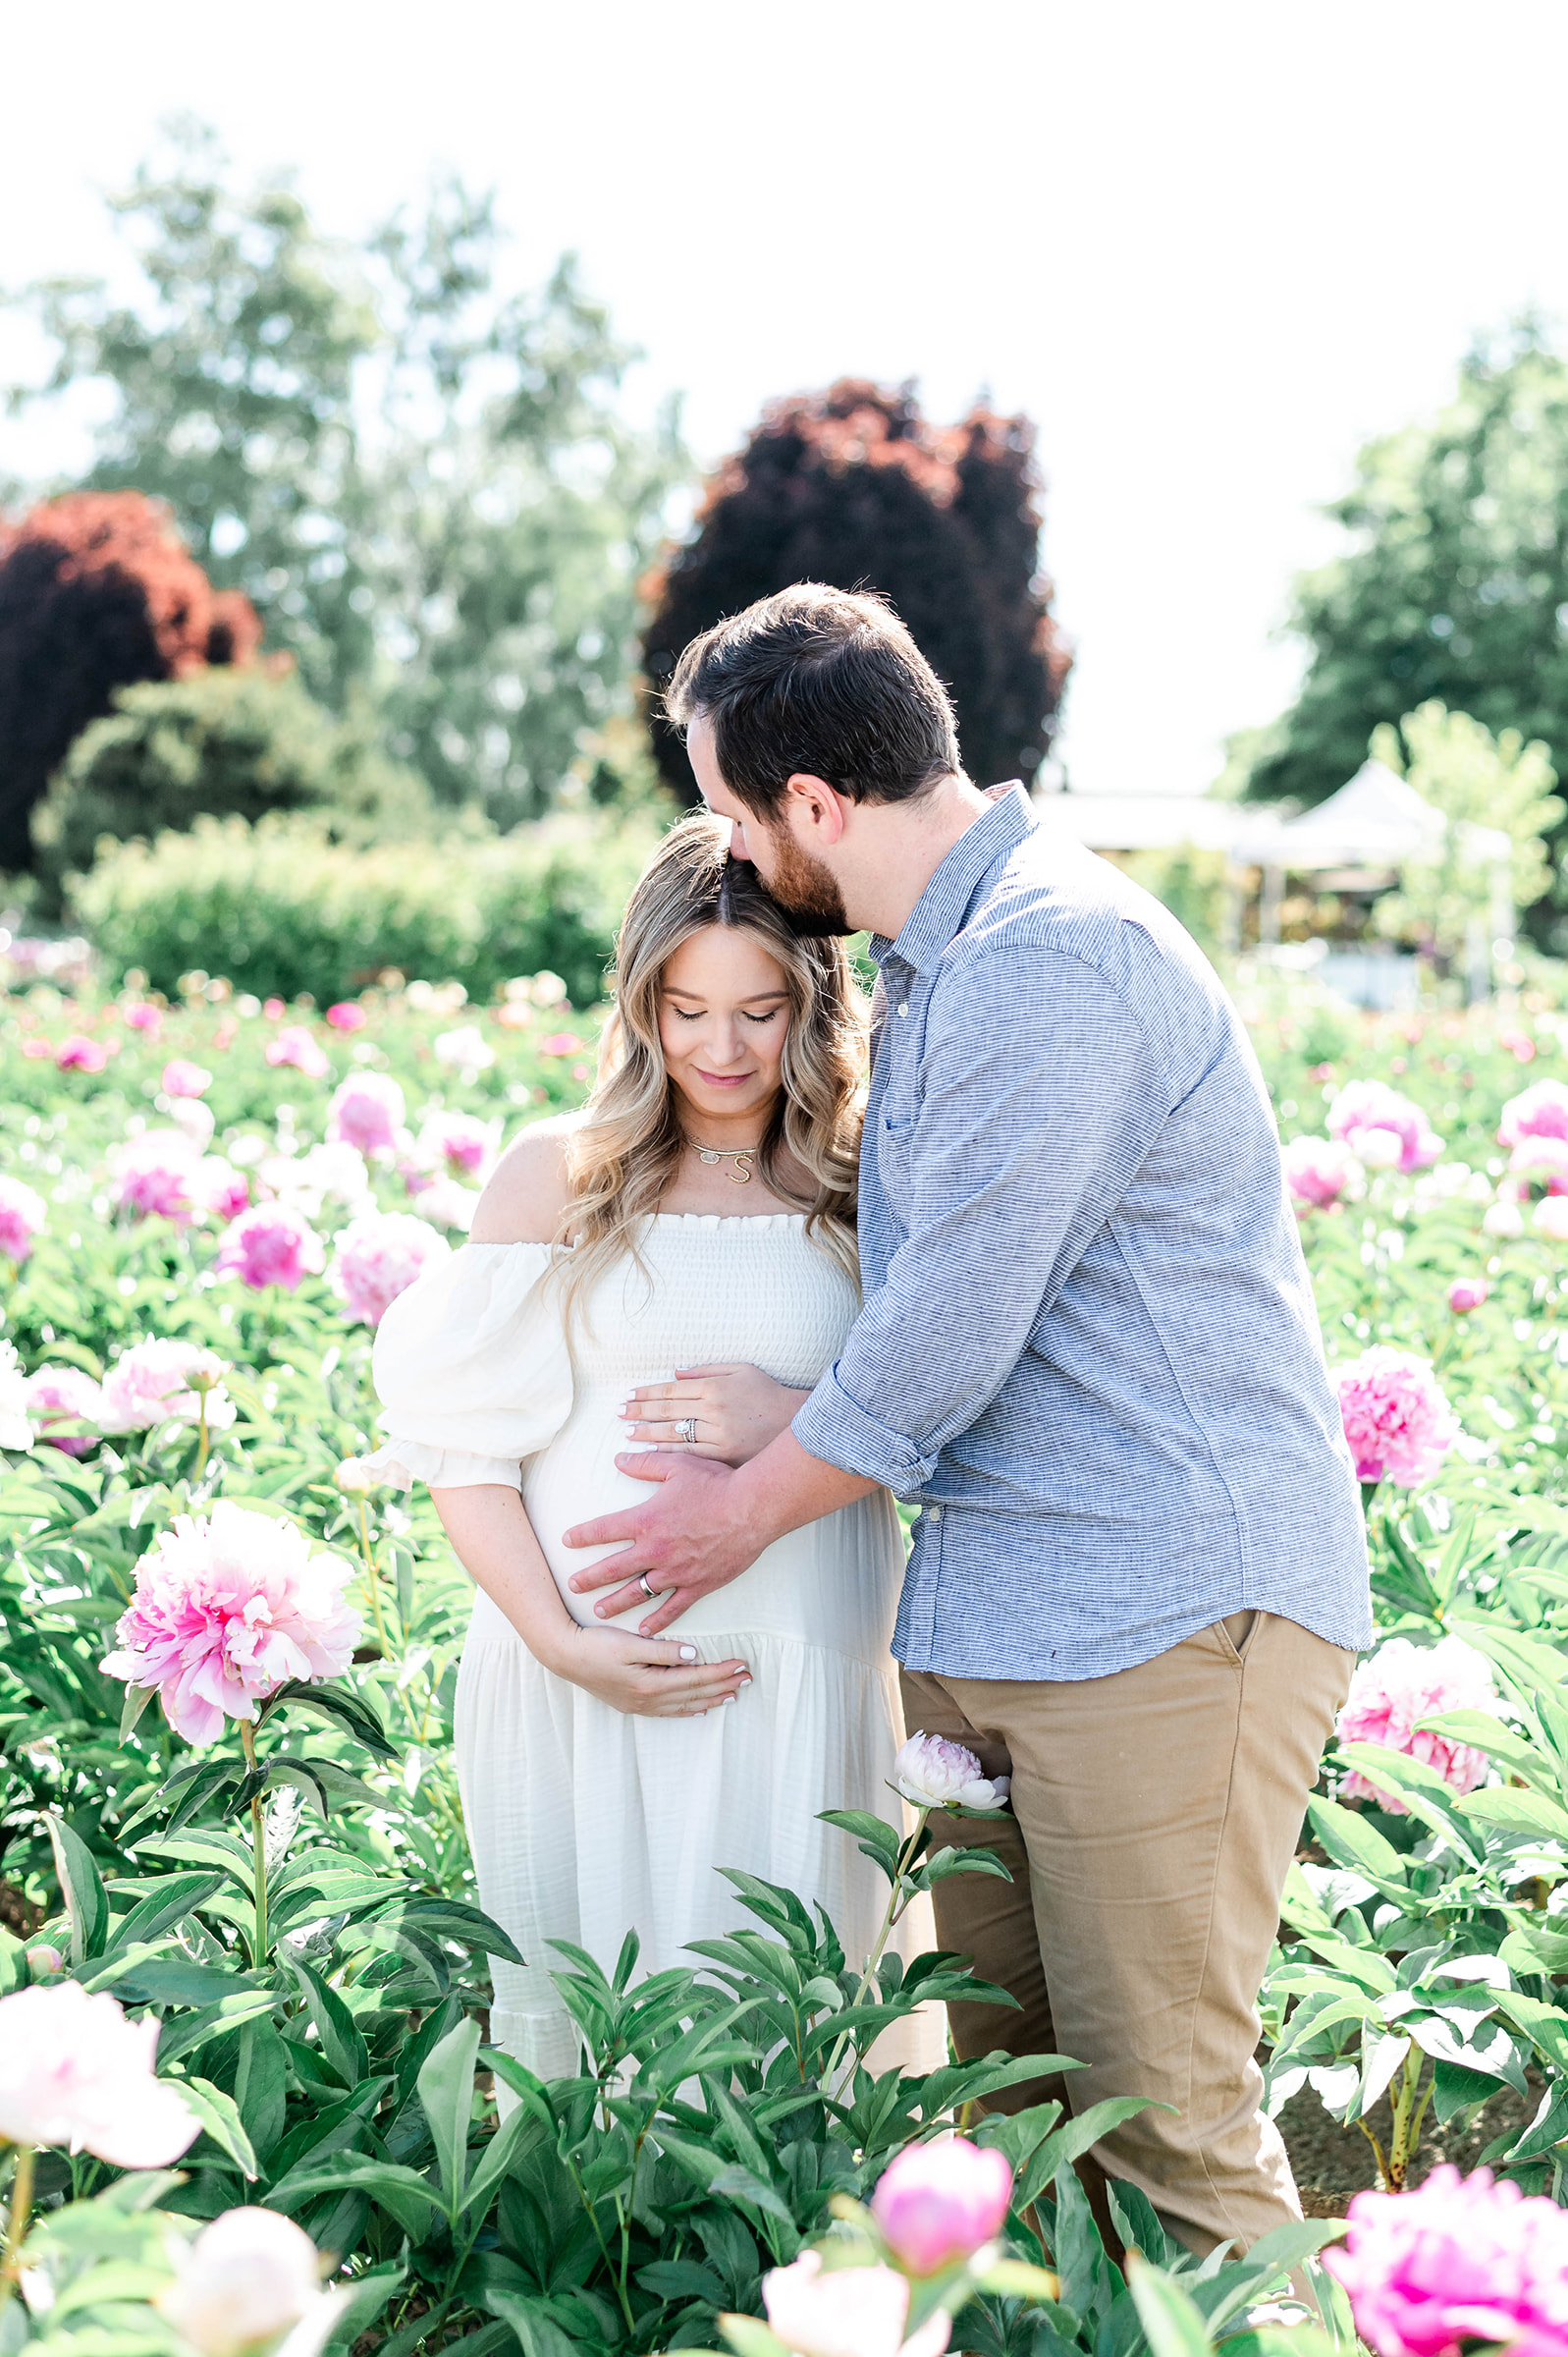 A pregnant woman wearing a flowing white dress with her husband, standing amid a colorful flower field of peonies